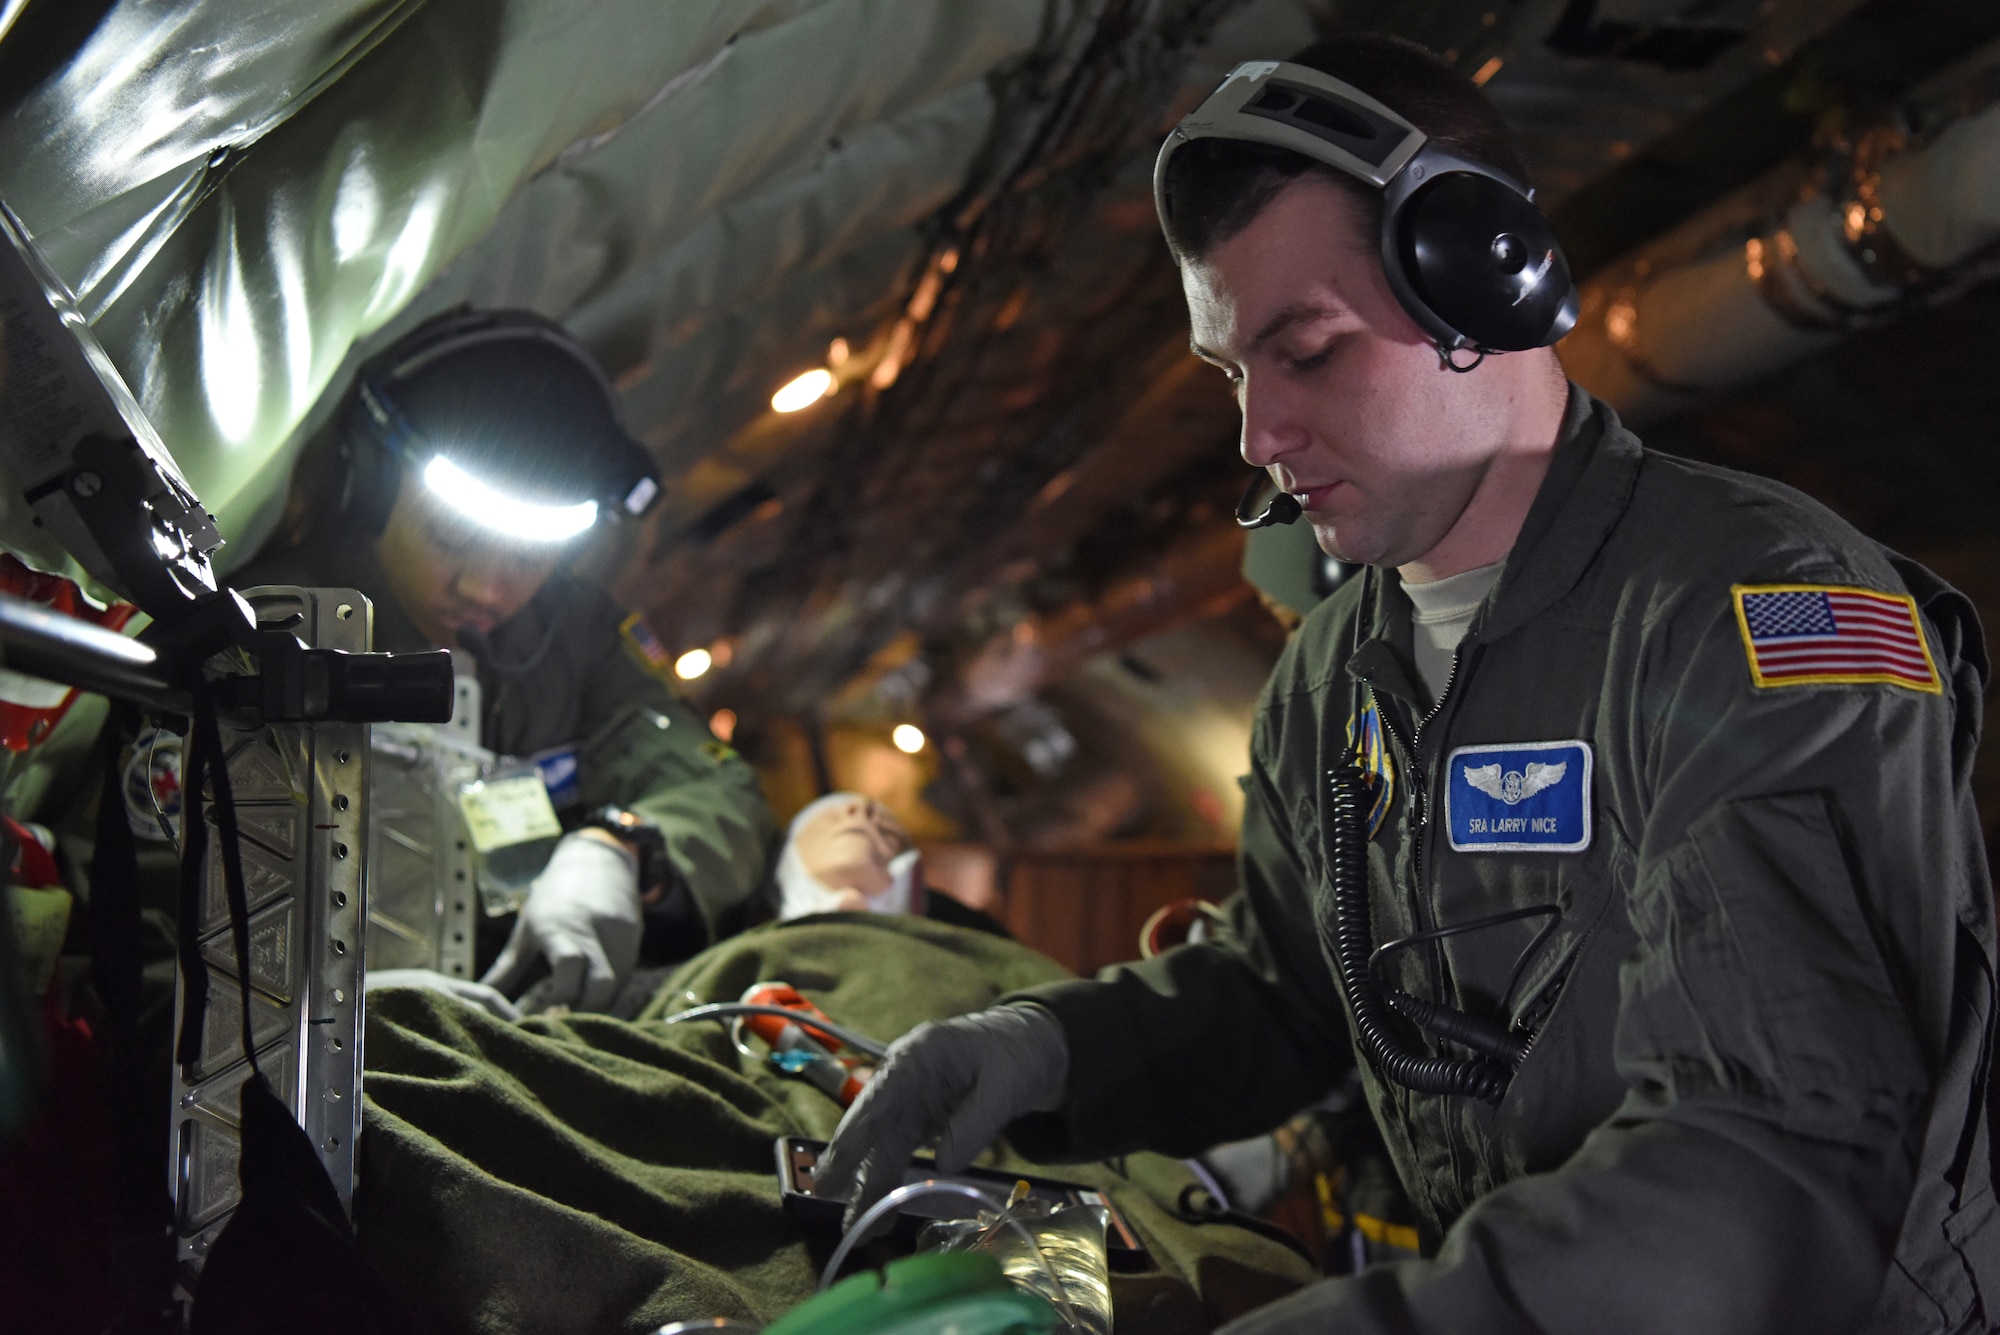 U.S. Air Force Staff Sgt. Yannick Sharras (left), 86th Aeromedical Evacuation Squadron medical technician, Ramstein Air Base, Germany, and Senior Airman Larry Nice, 86th AES medical technician, prepare a patient for medical evacuation aboard a KC-135 Stratotanker, Jan. 23, 2019. During the training, members underwent emergency medical scenarios, including treatment for patients suffering worsening health conditions, cardiac emergencies, aircraft decompression, and emergency ditching. (U.S. Air Force photo by Airman 1st Class Brandon Esau)